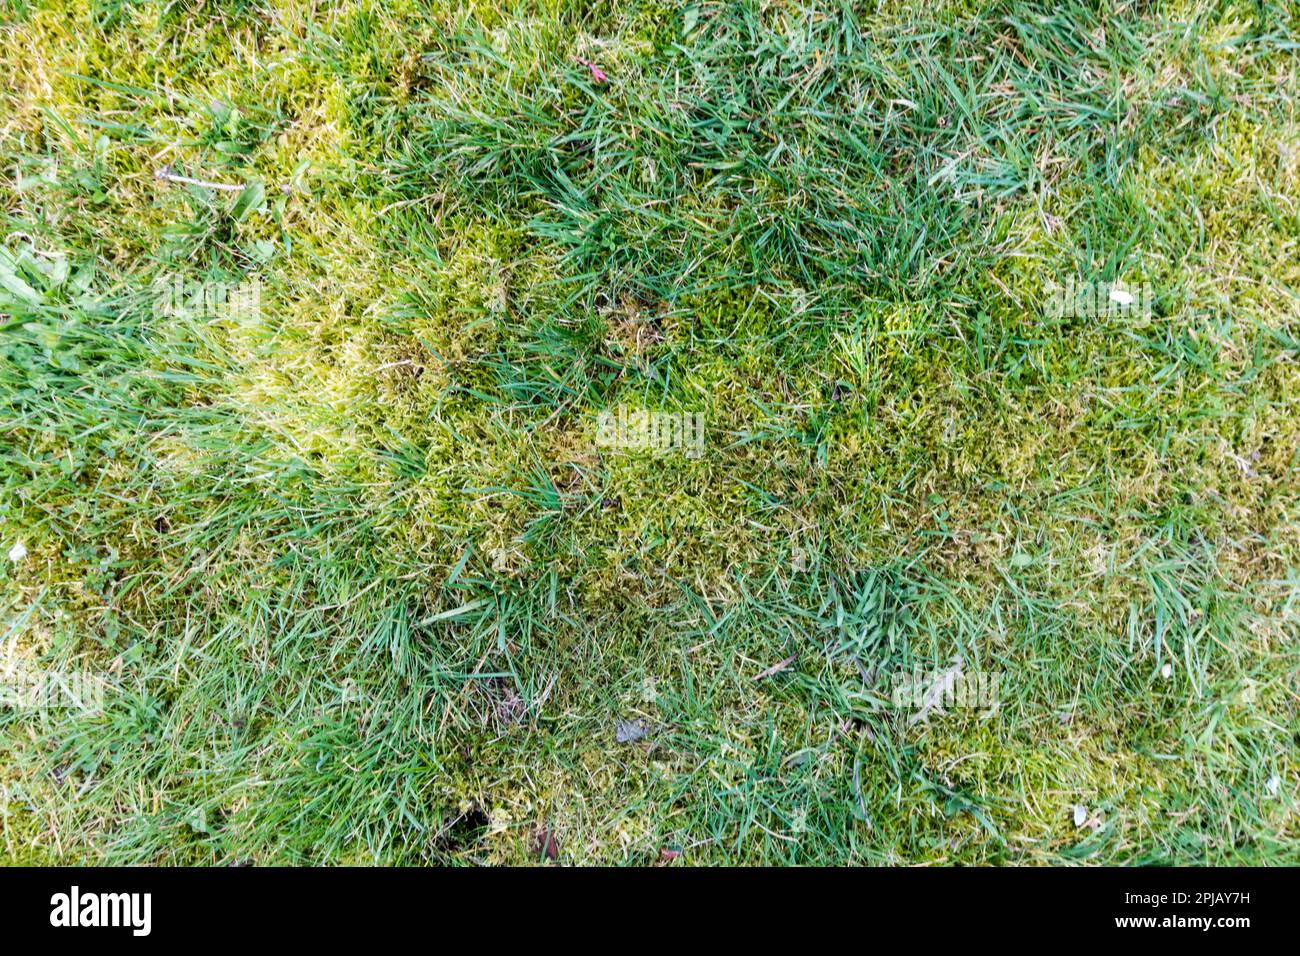 Stand of Moss on Lawn Stock Photo - Alamy